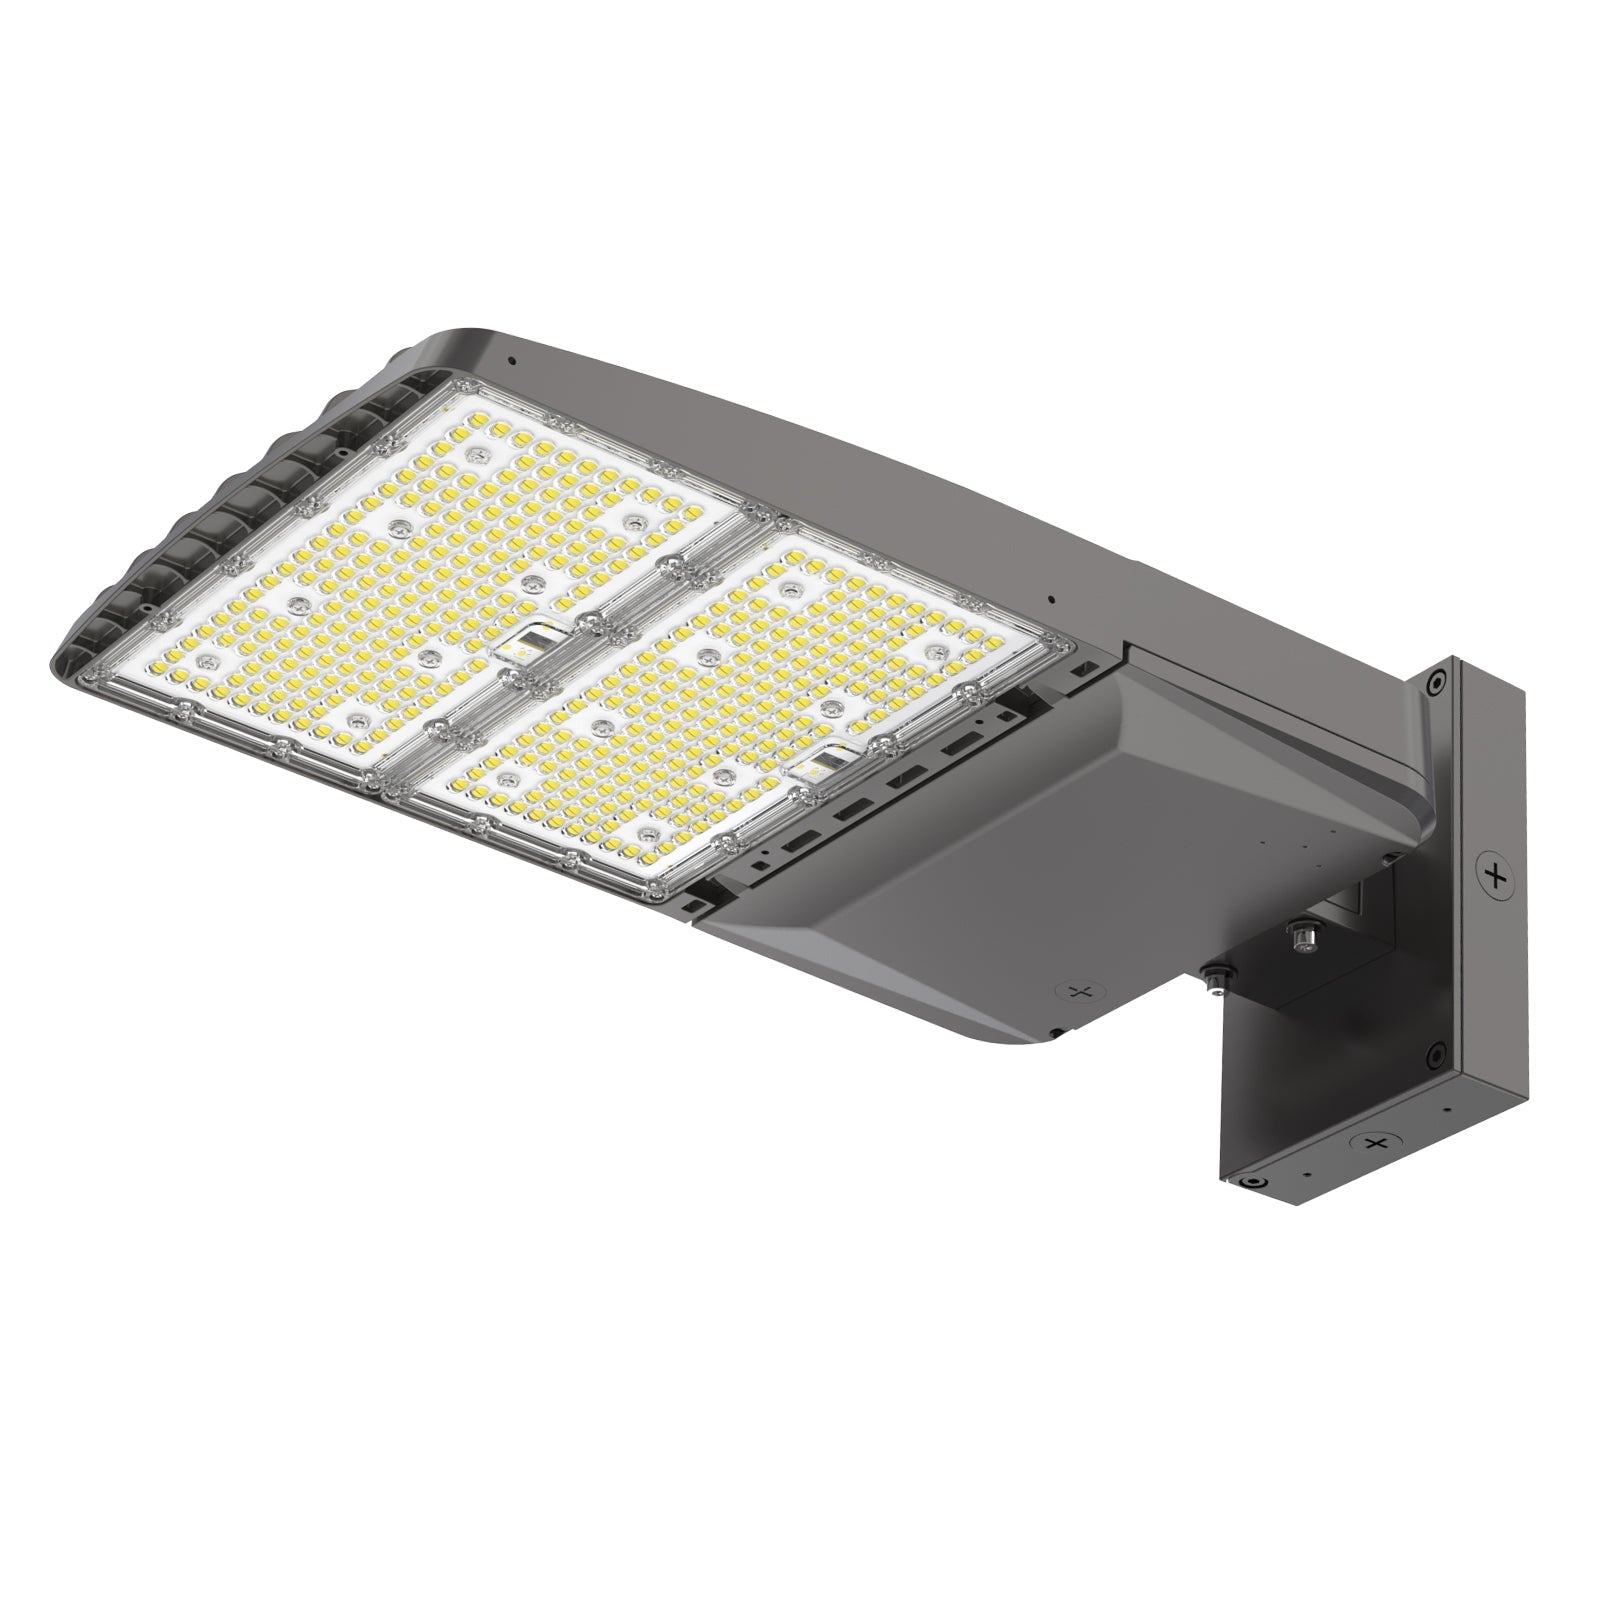 XALH Series Area Light - With Shortcap, AC 120V-277V, 80W-310W, Selectable Wattage